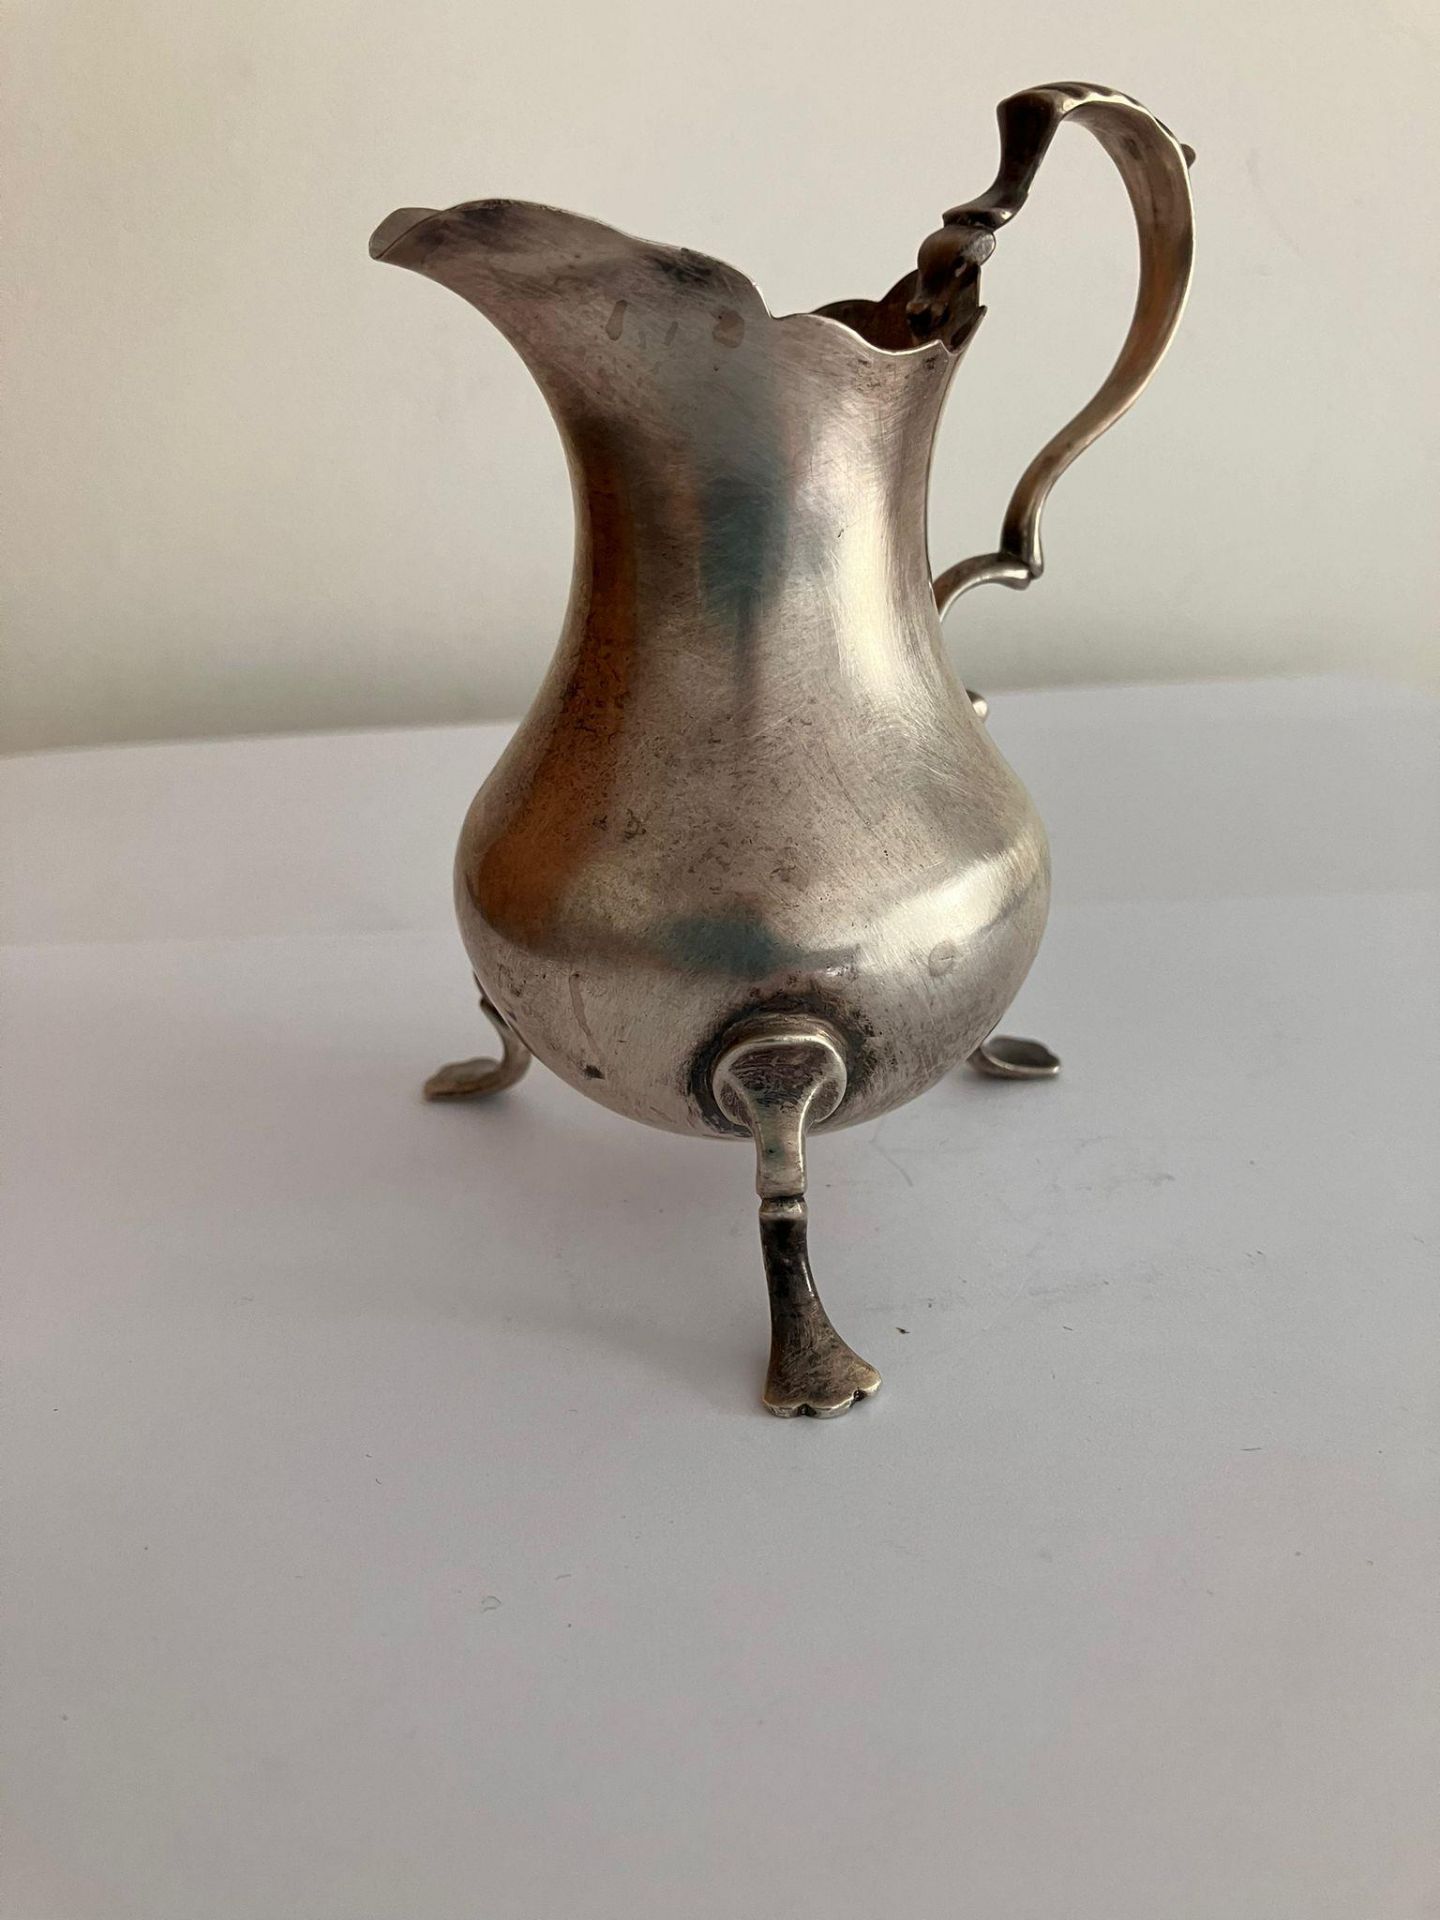 Antique SILVER CREAMER JUG. Clear hallmark for Haseler and Bill, Chester 1921. Extremely